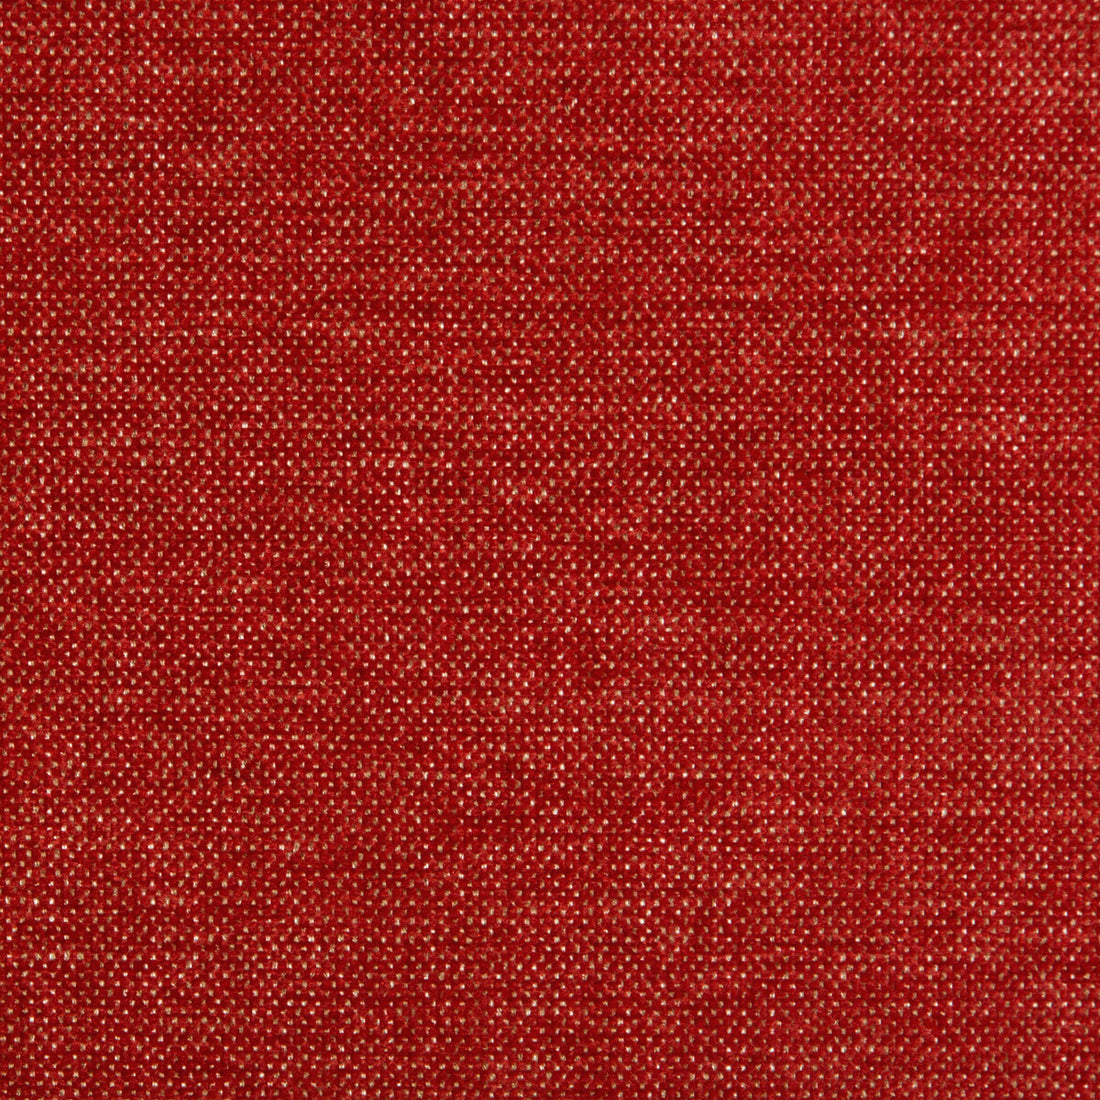 Kravet Contract fabric in 35407-19 color - pattern 35407.19.0 - by Kravet Contract in the Crypton Incase collection